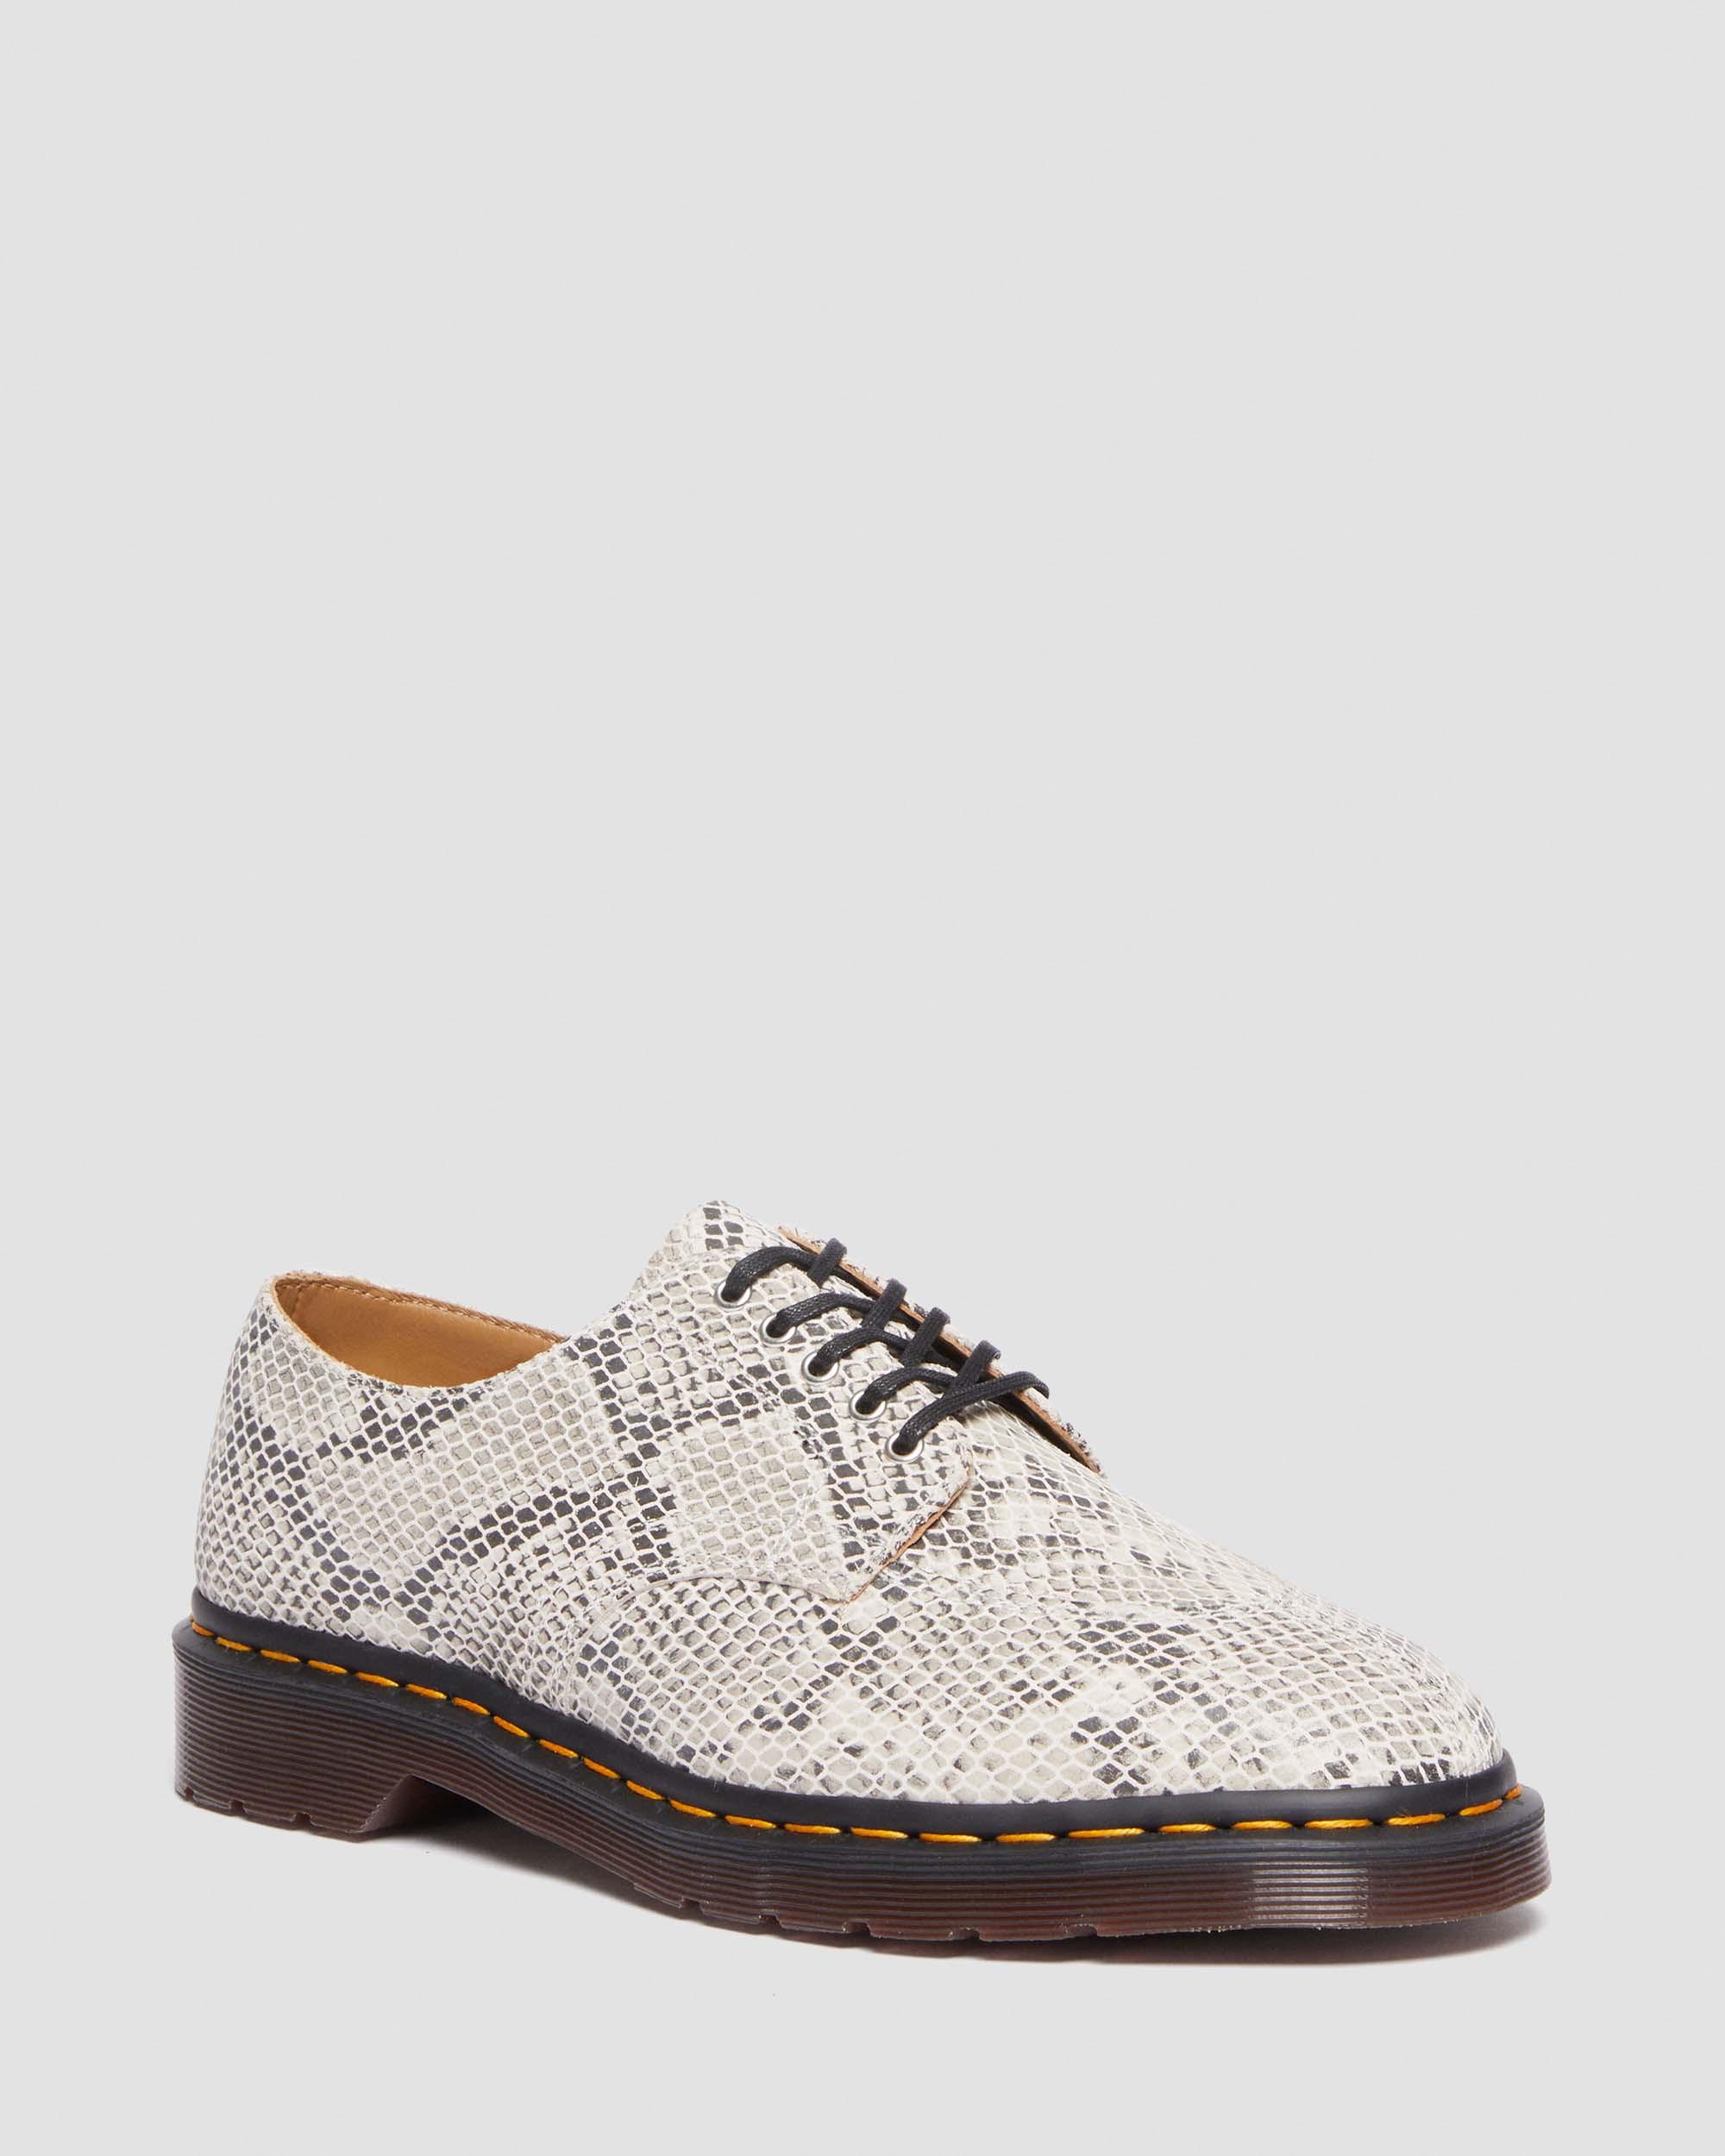 2046 Snake Print Suede Oxford Shoes